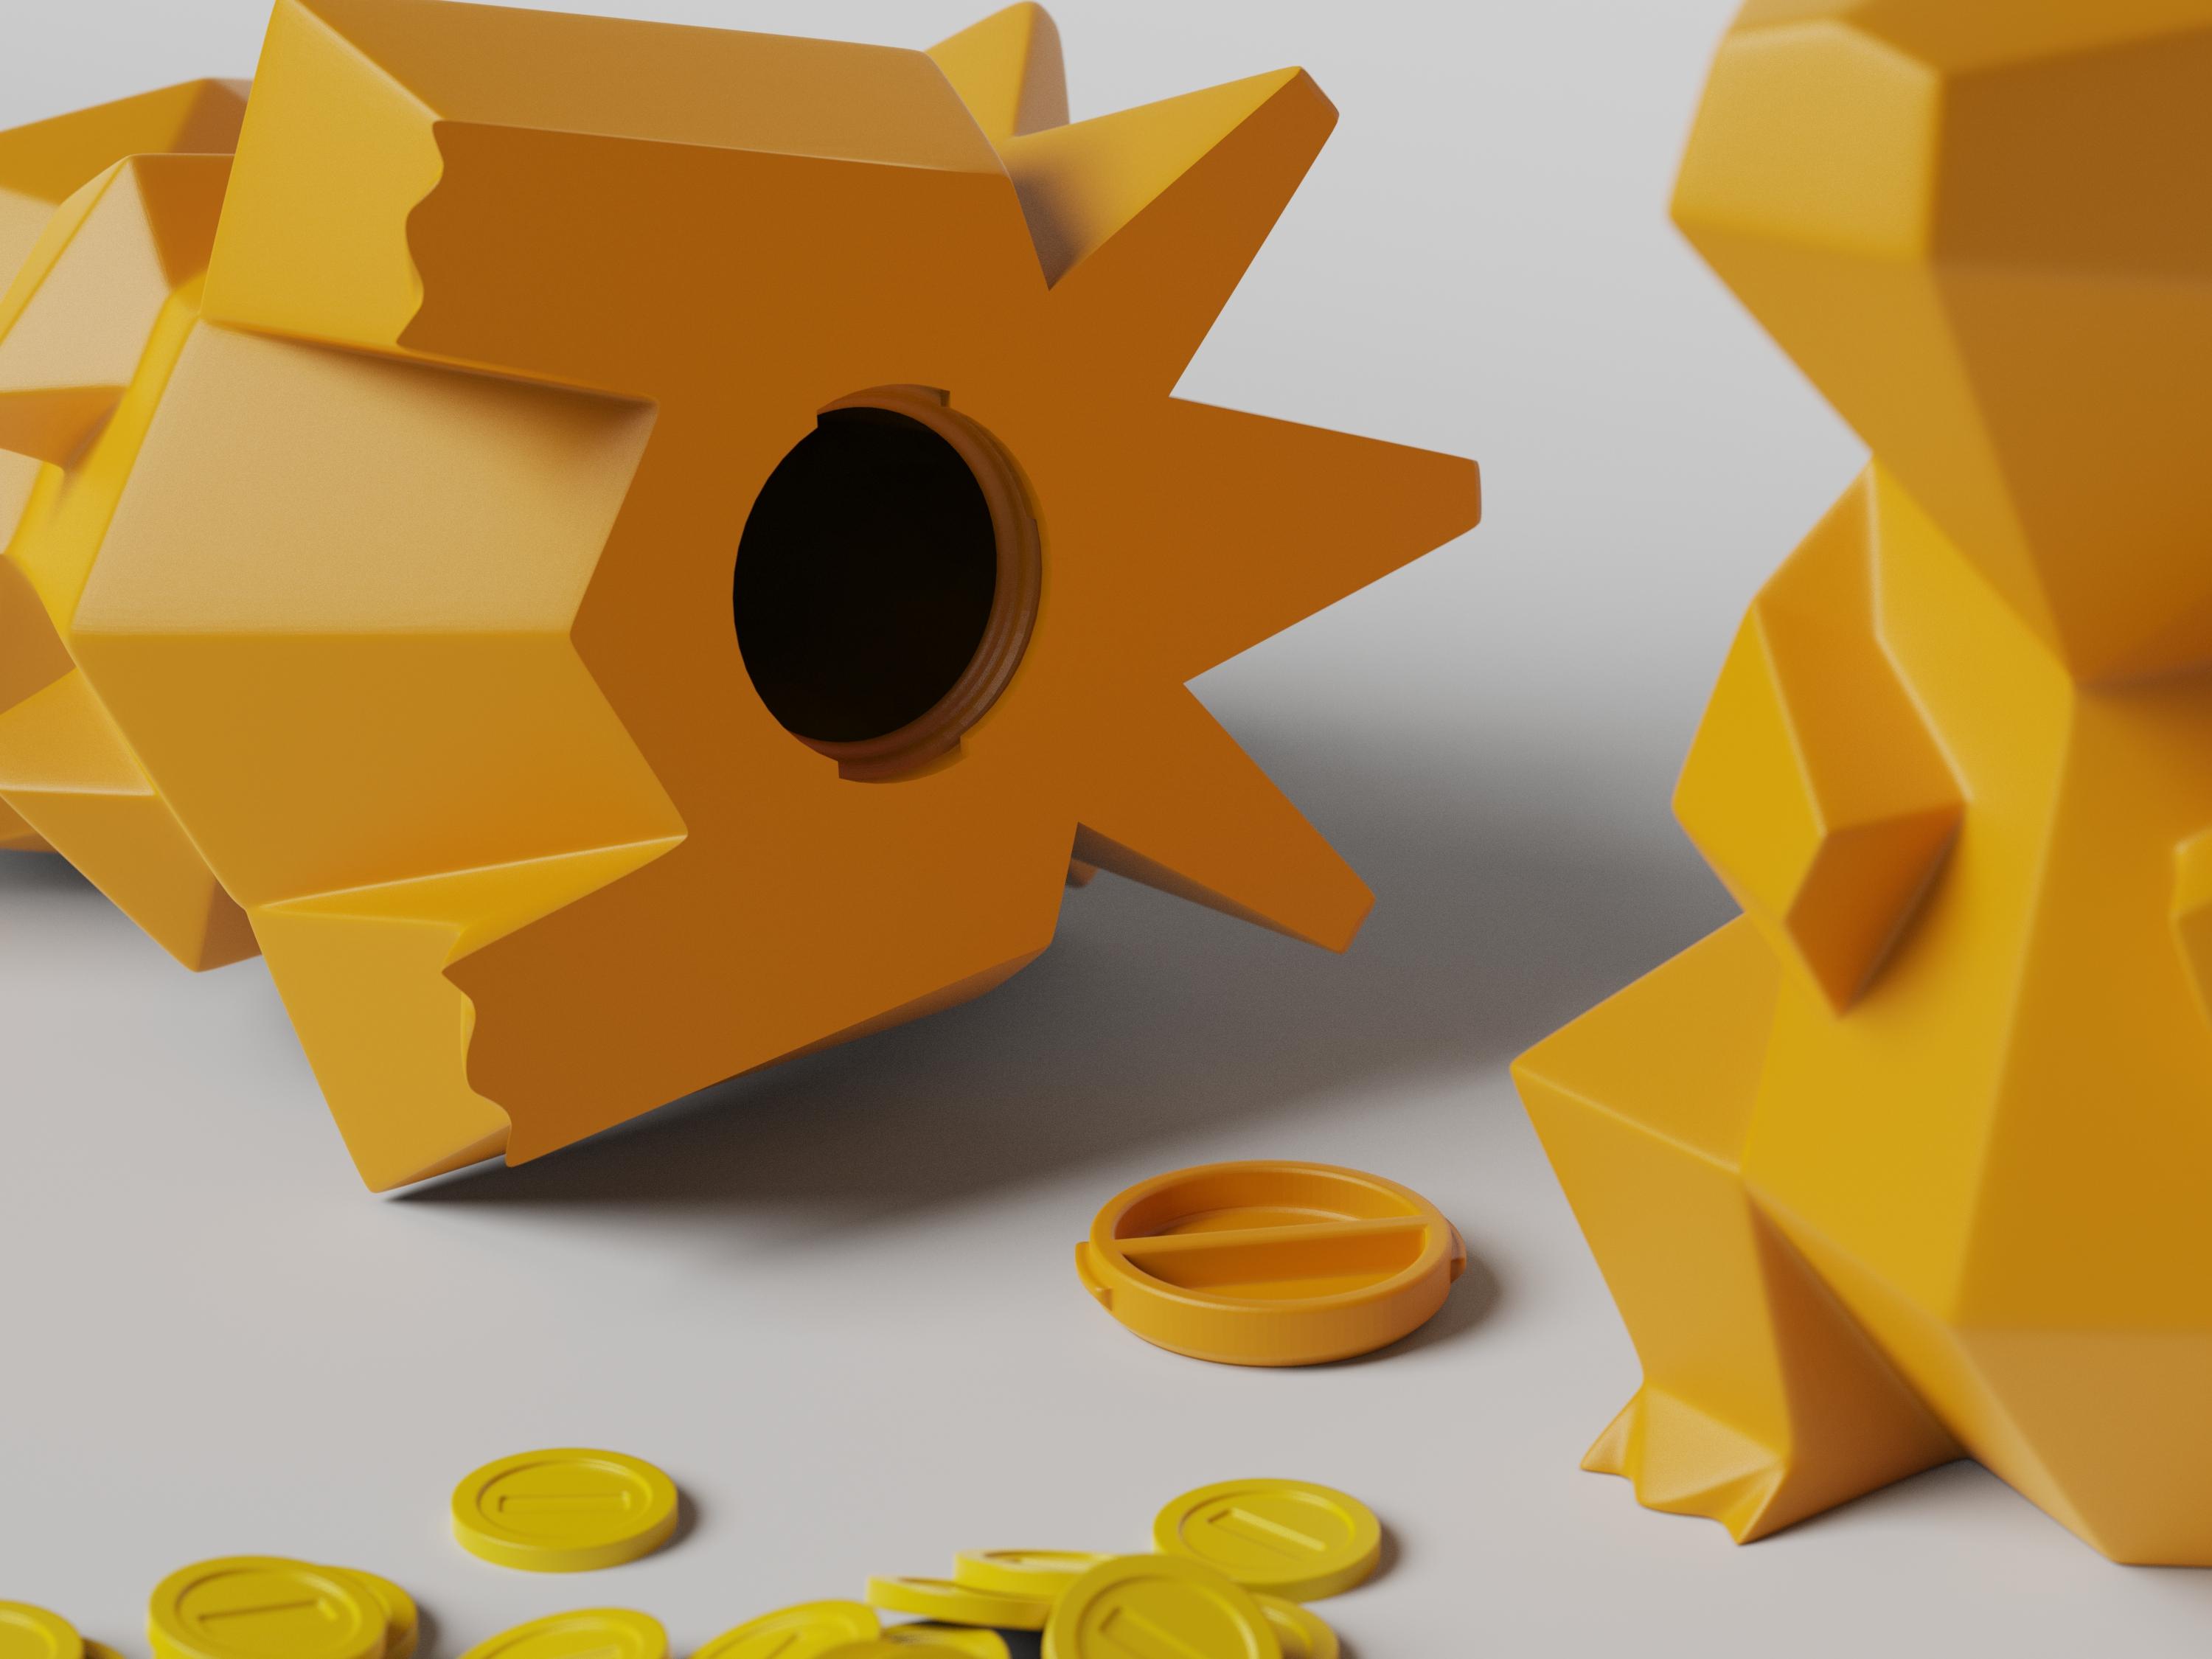 Low-poly Cyndaquil - Piggy Bank 3d model